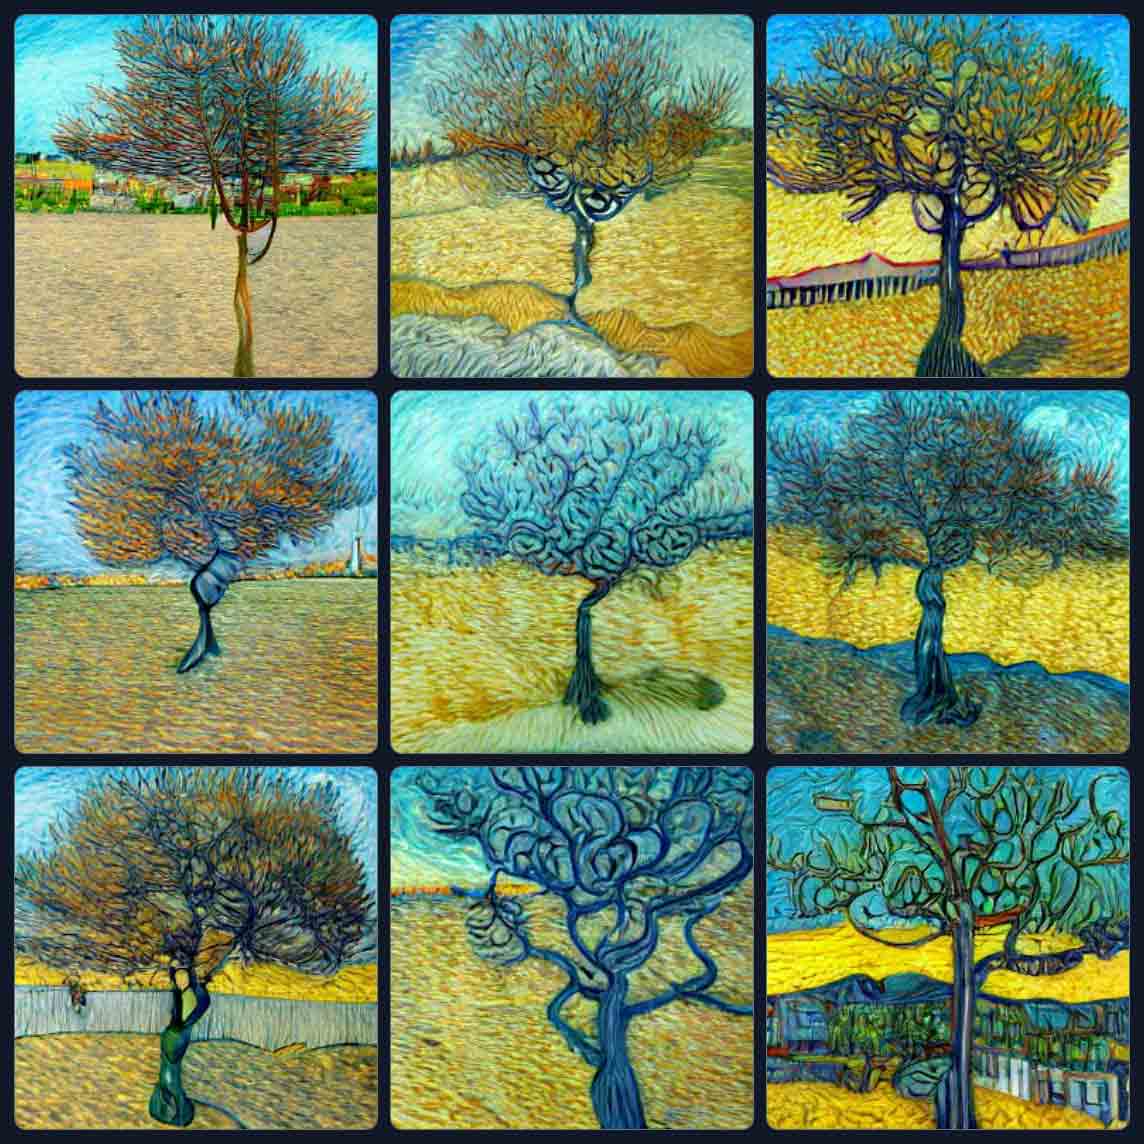 9 paintings of a tree, mostly devoid of leaves, all with characteristic strong and abbreviated brush strokes. Each tree is alone in a field of mostly wheat color, with some near a fence or with a village in the background.